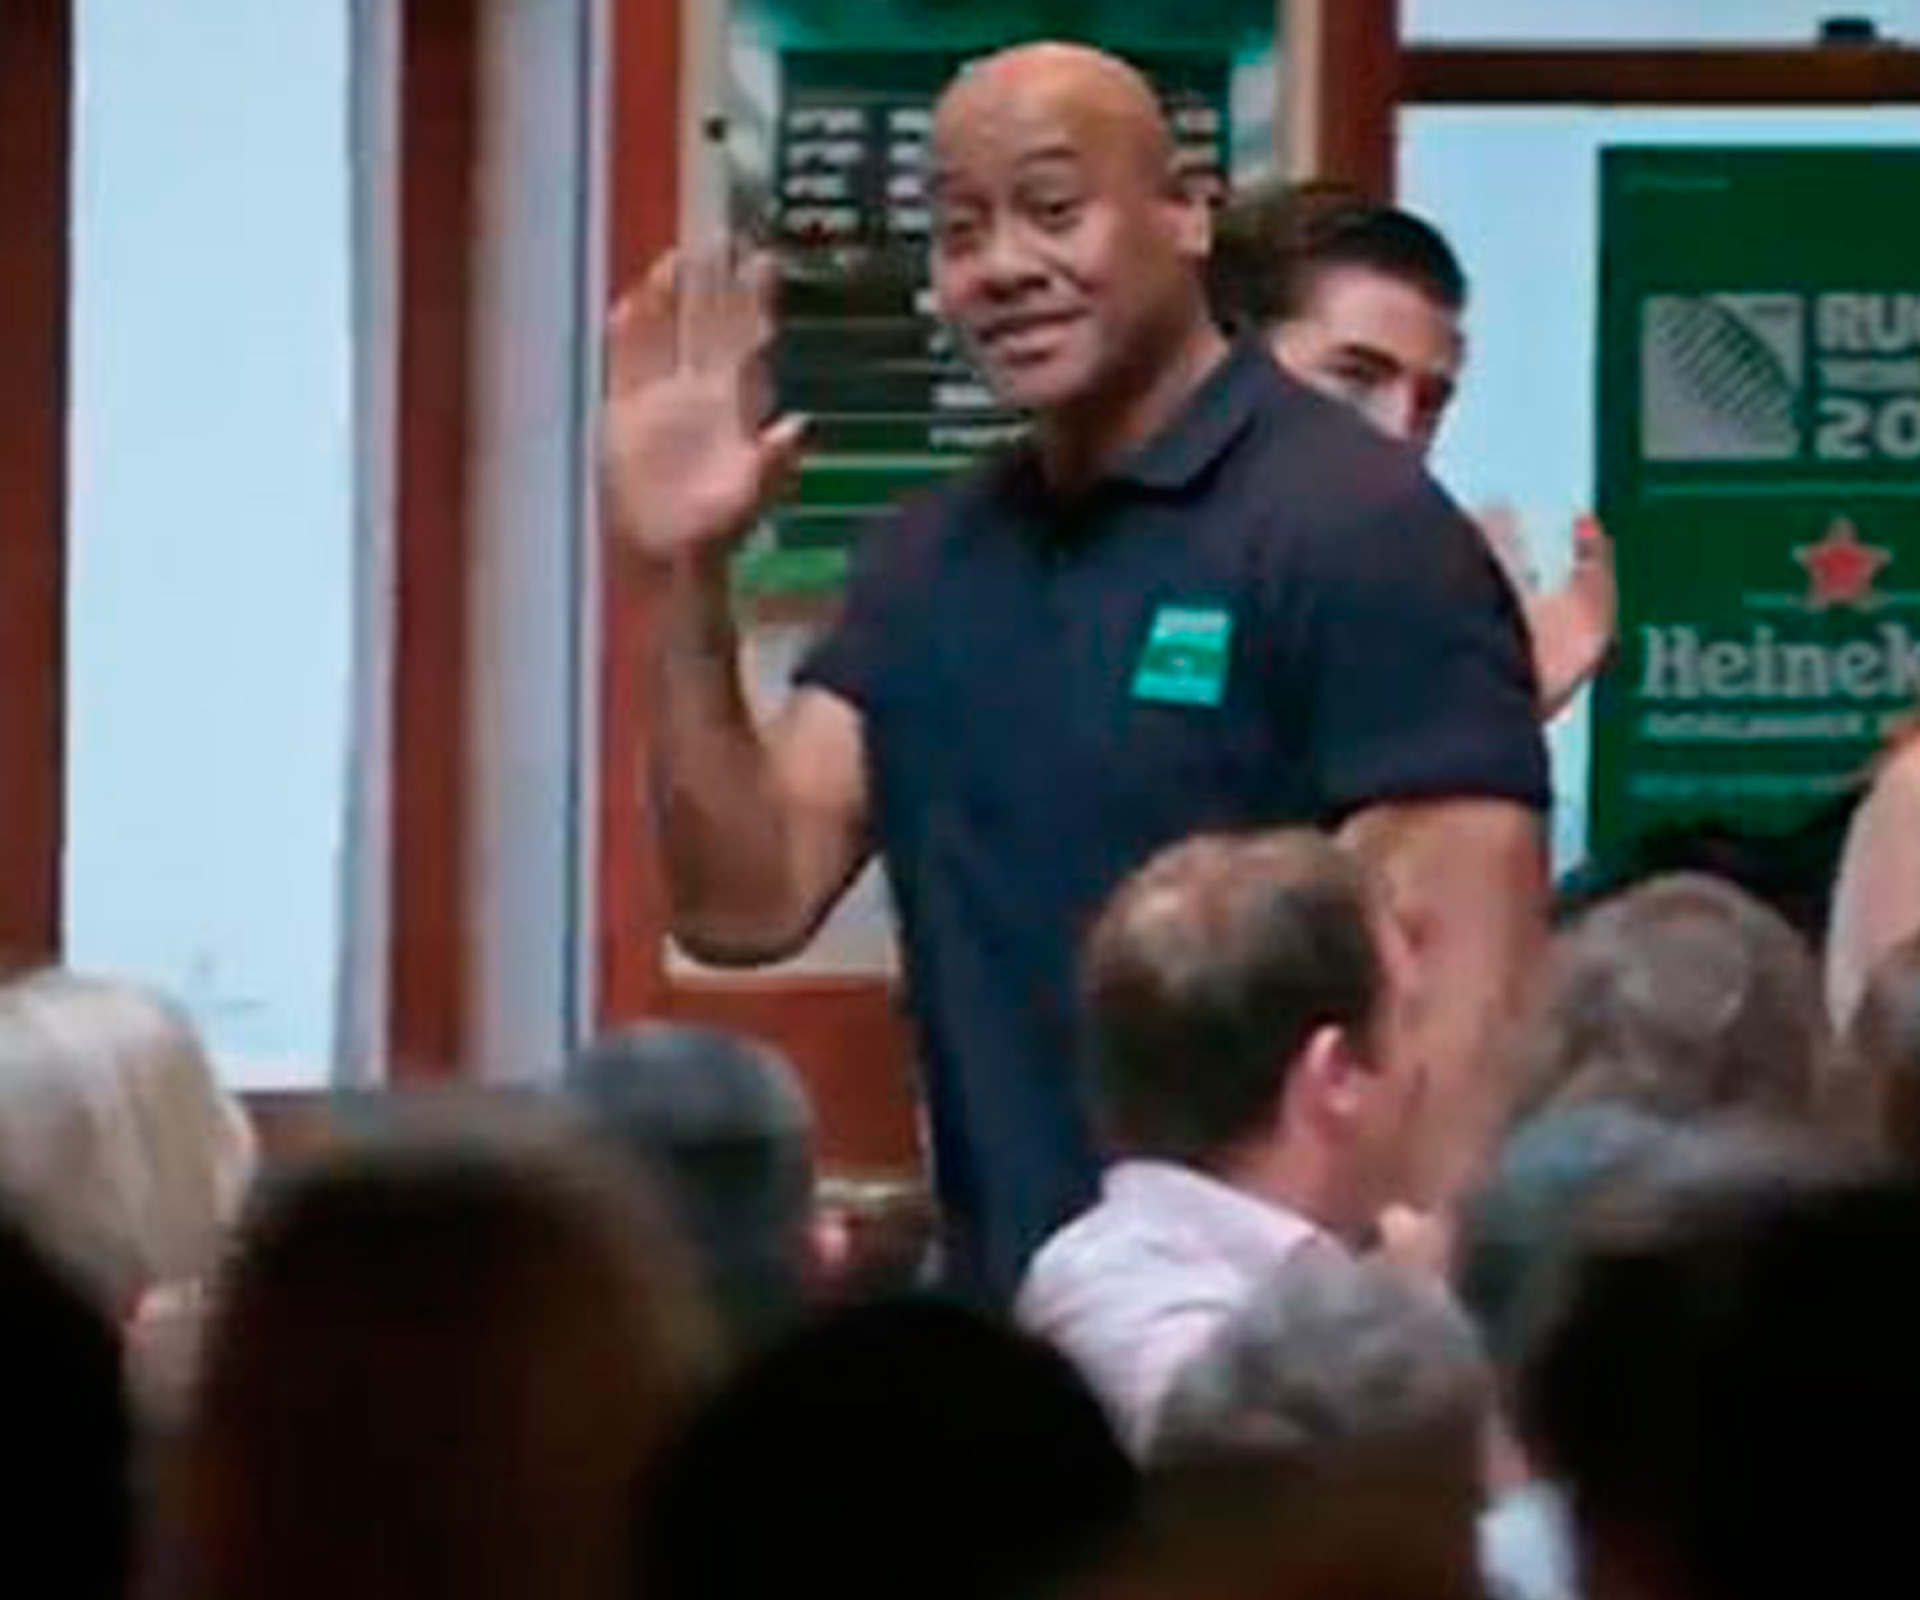 Rugby great Jonah Lomu has been pranking punters in an Irish pub, by hiding in a quiz machine.